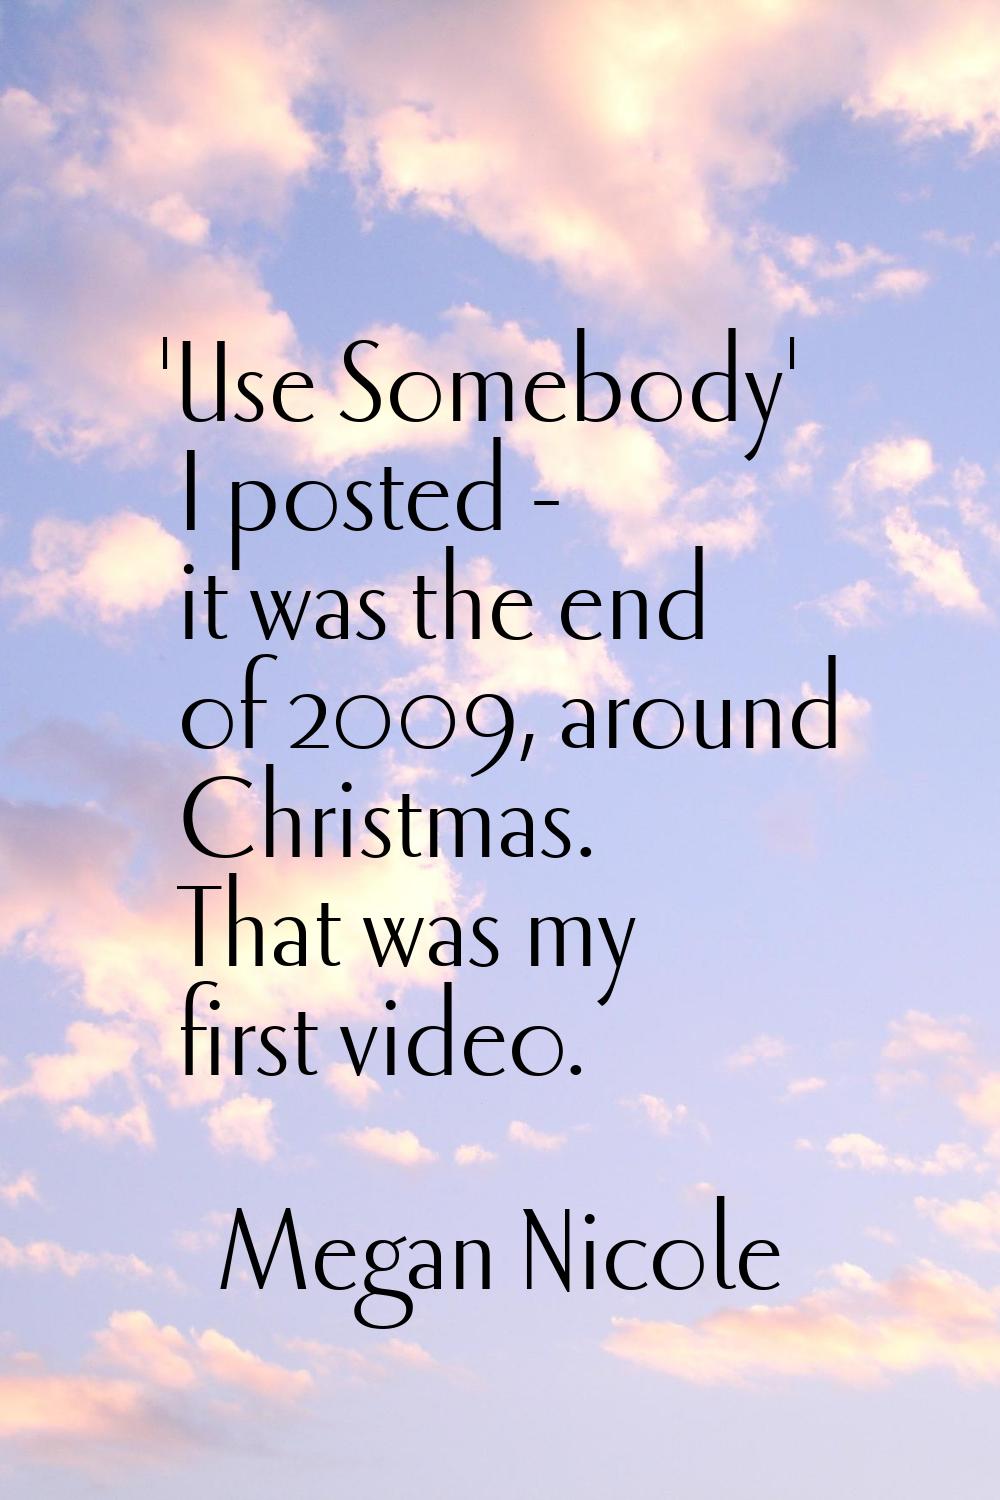 'Use Somebody' I posted - it was the end of 2009, around Christmas. That was my first video.